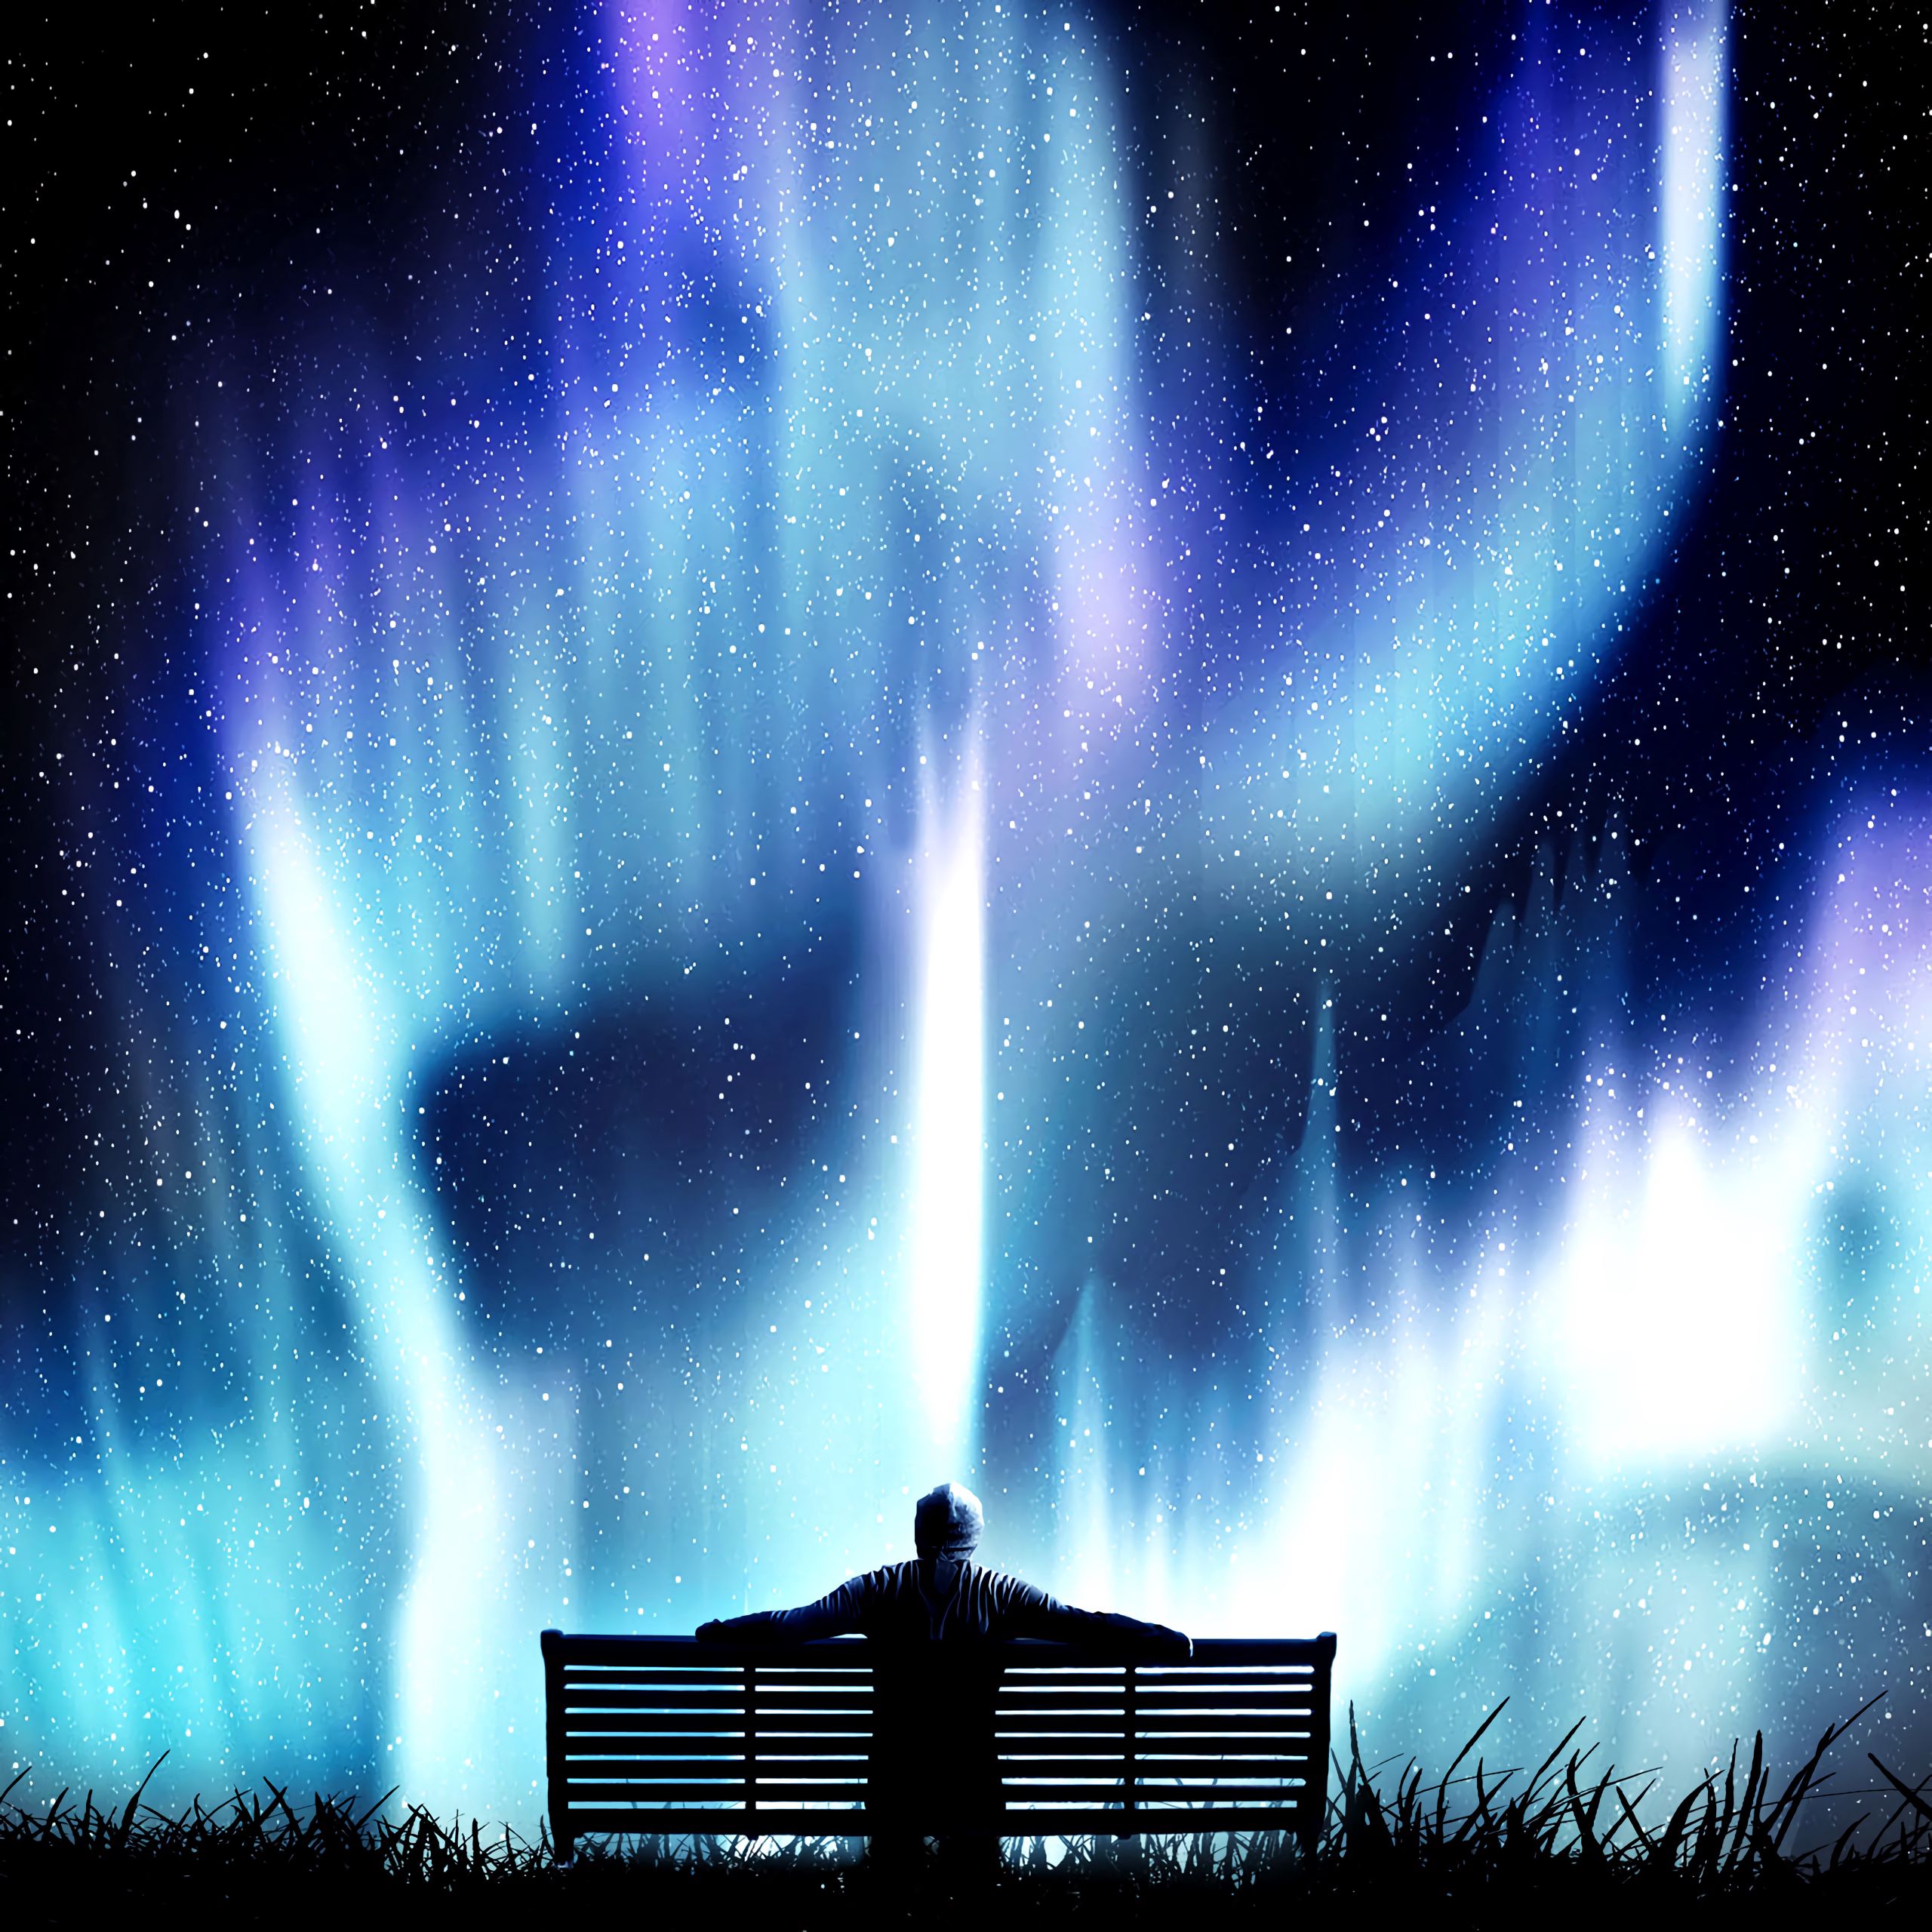 loneliness, northern lights, aurora borealis, nature, starry sky, photoshop, bench